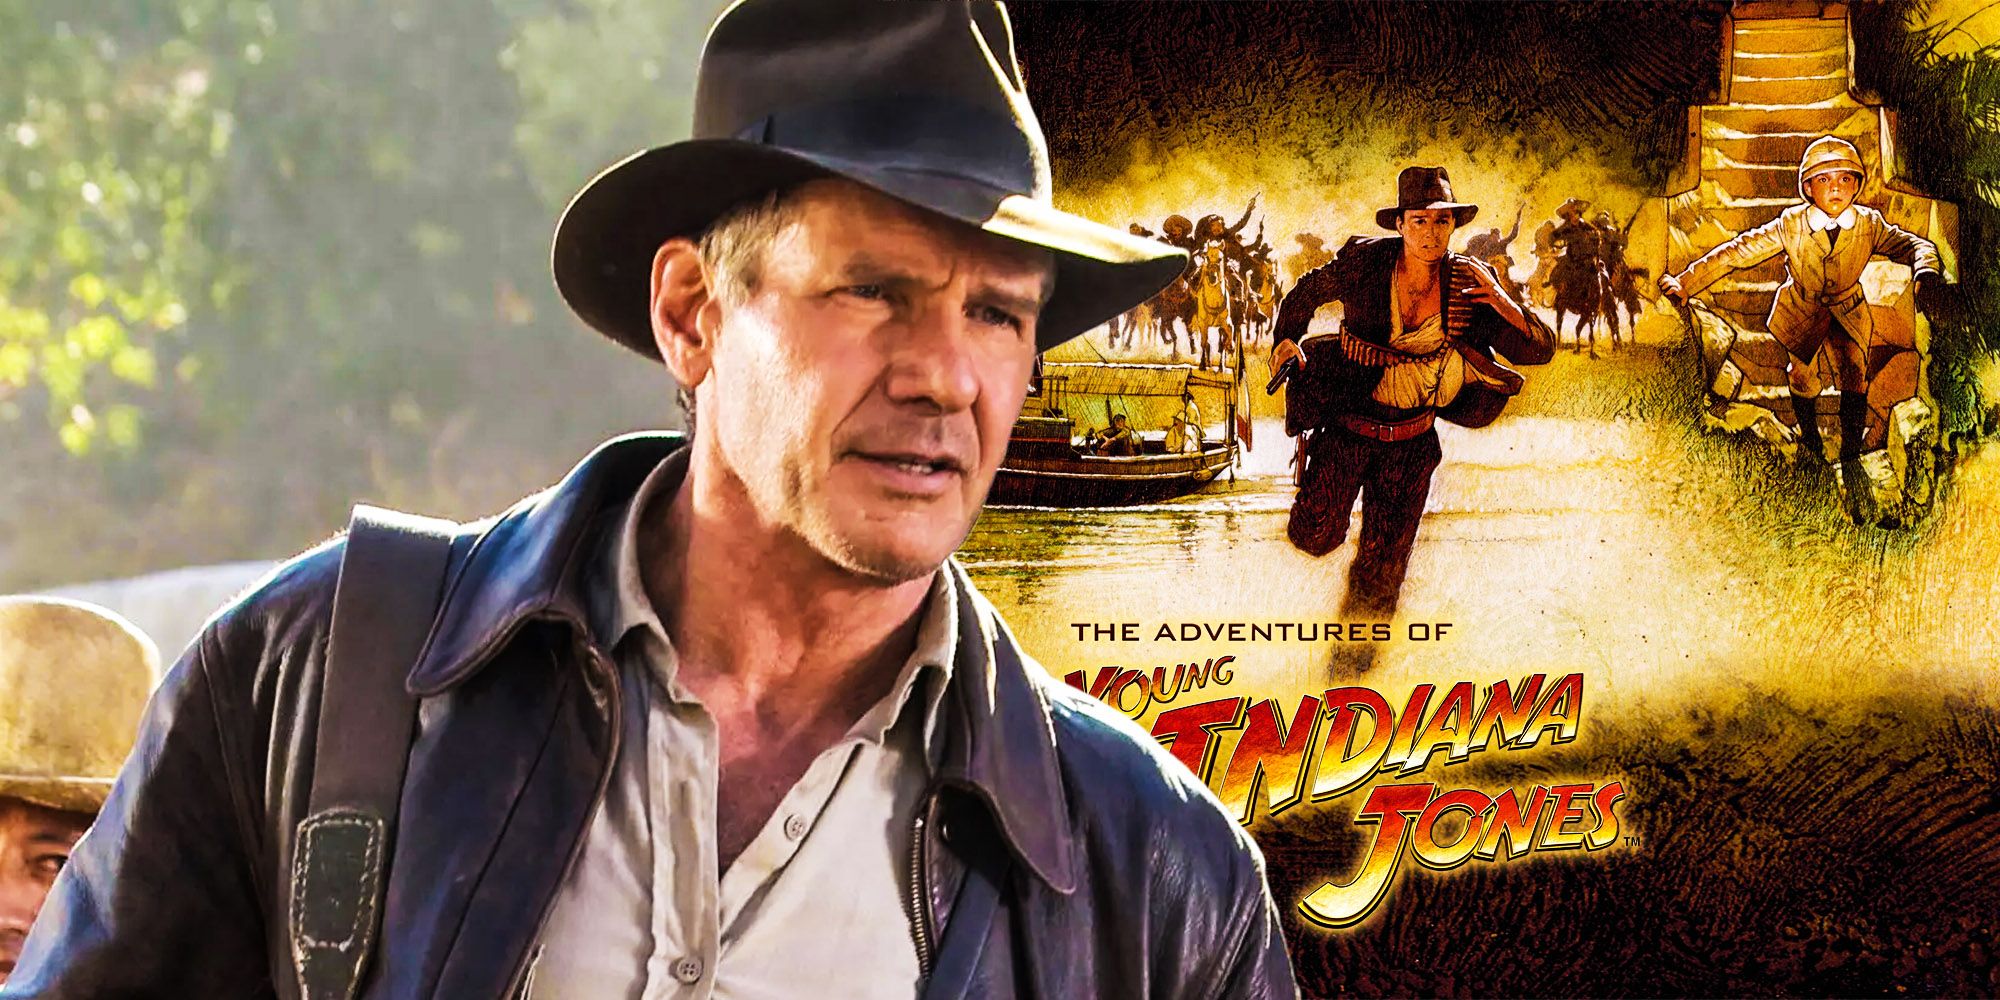 Indiana Jones 5 Is The Last Chance To Payoff A Young Chronicles Storyline